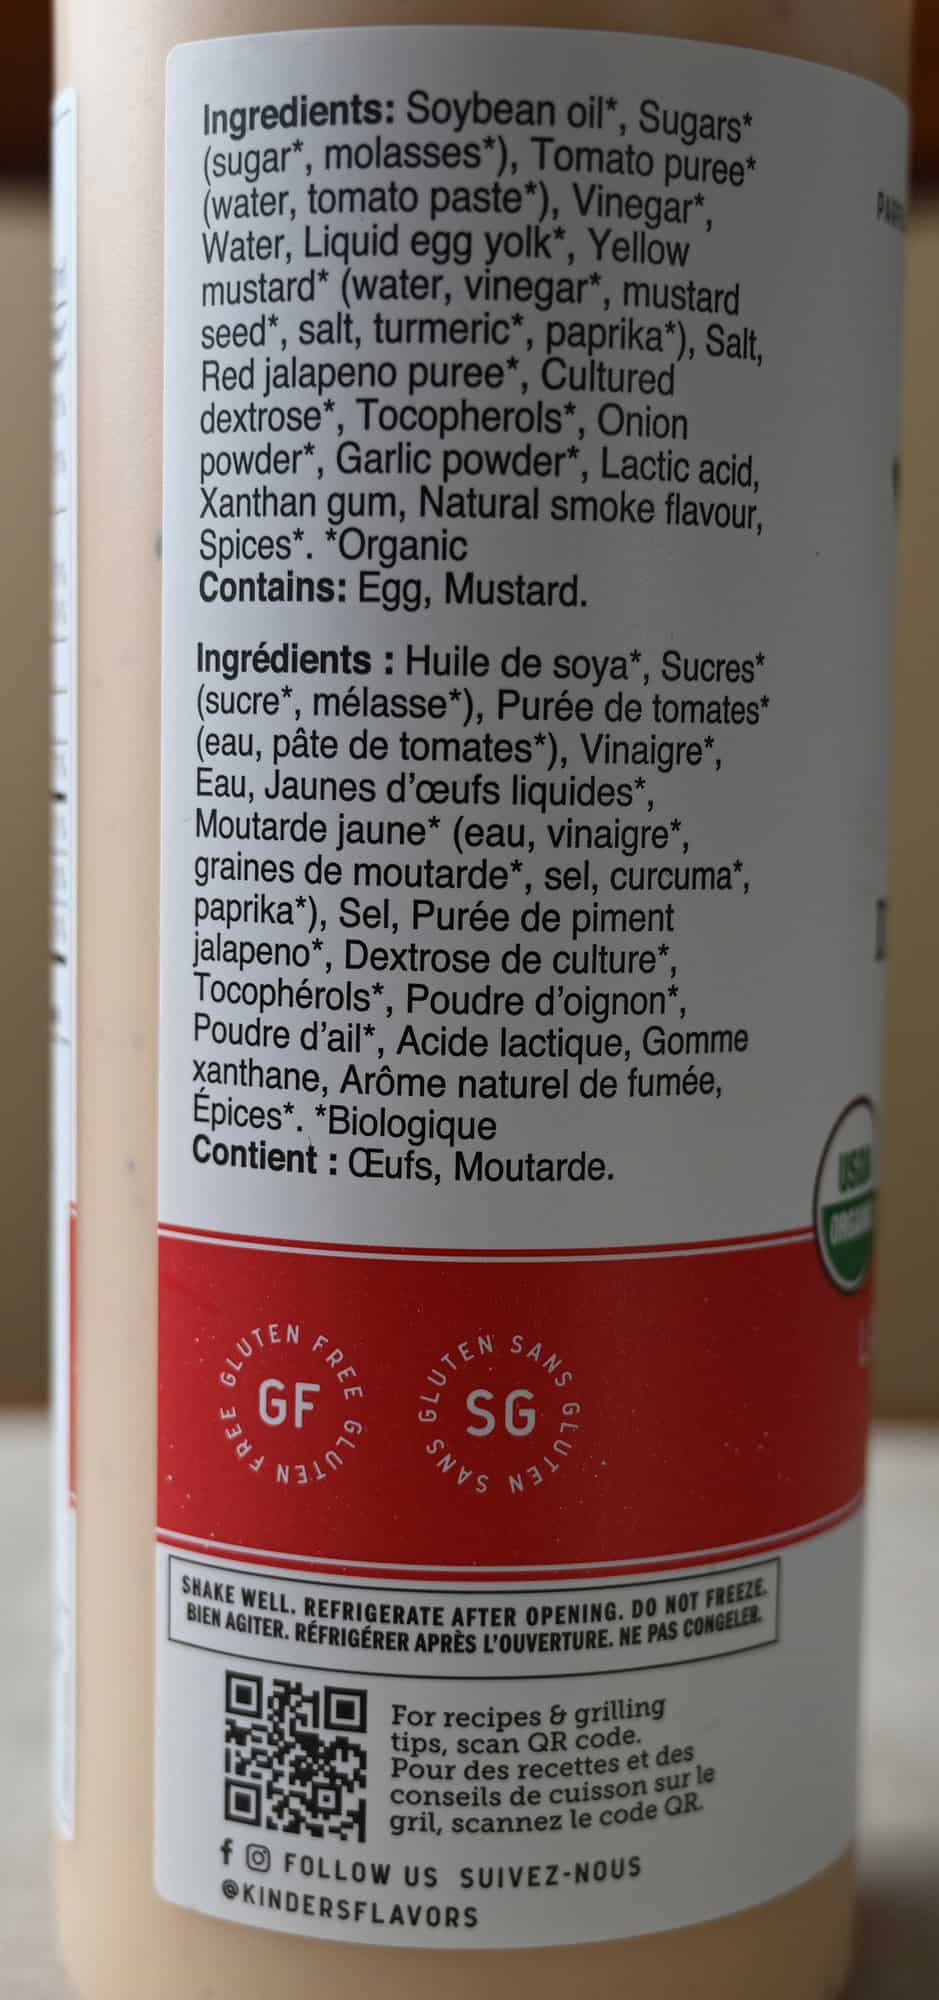 Image of the back of the sauce countainer showing ingredients, that it's gluten free and recipes.